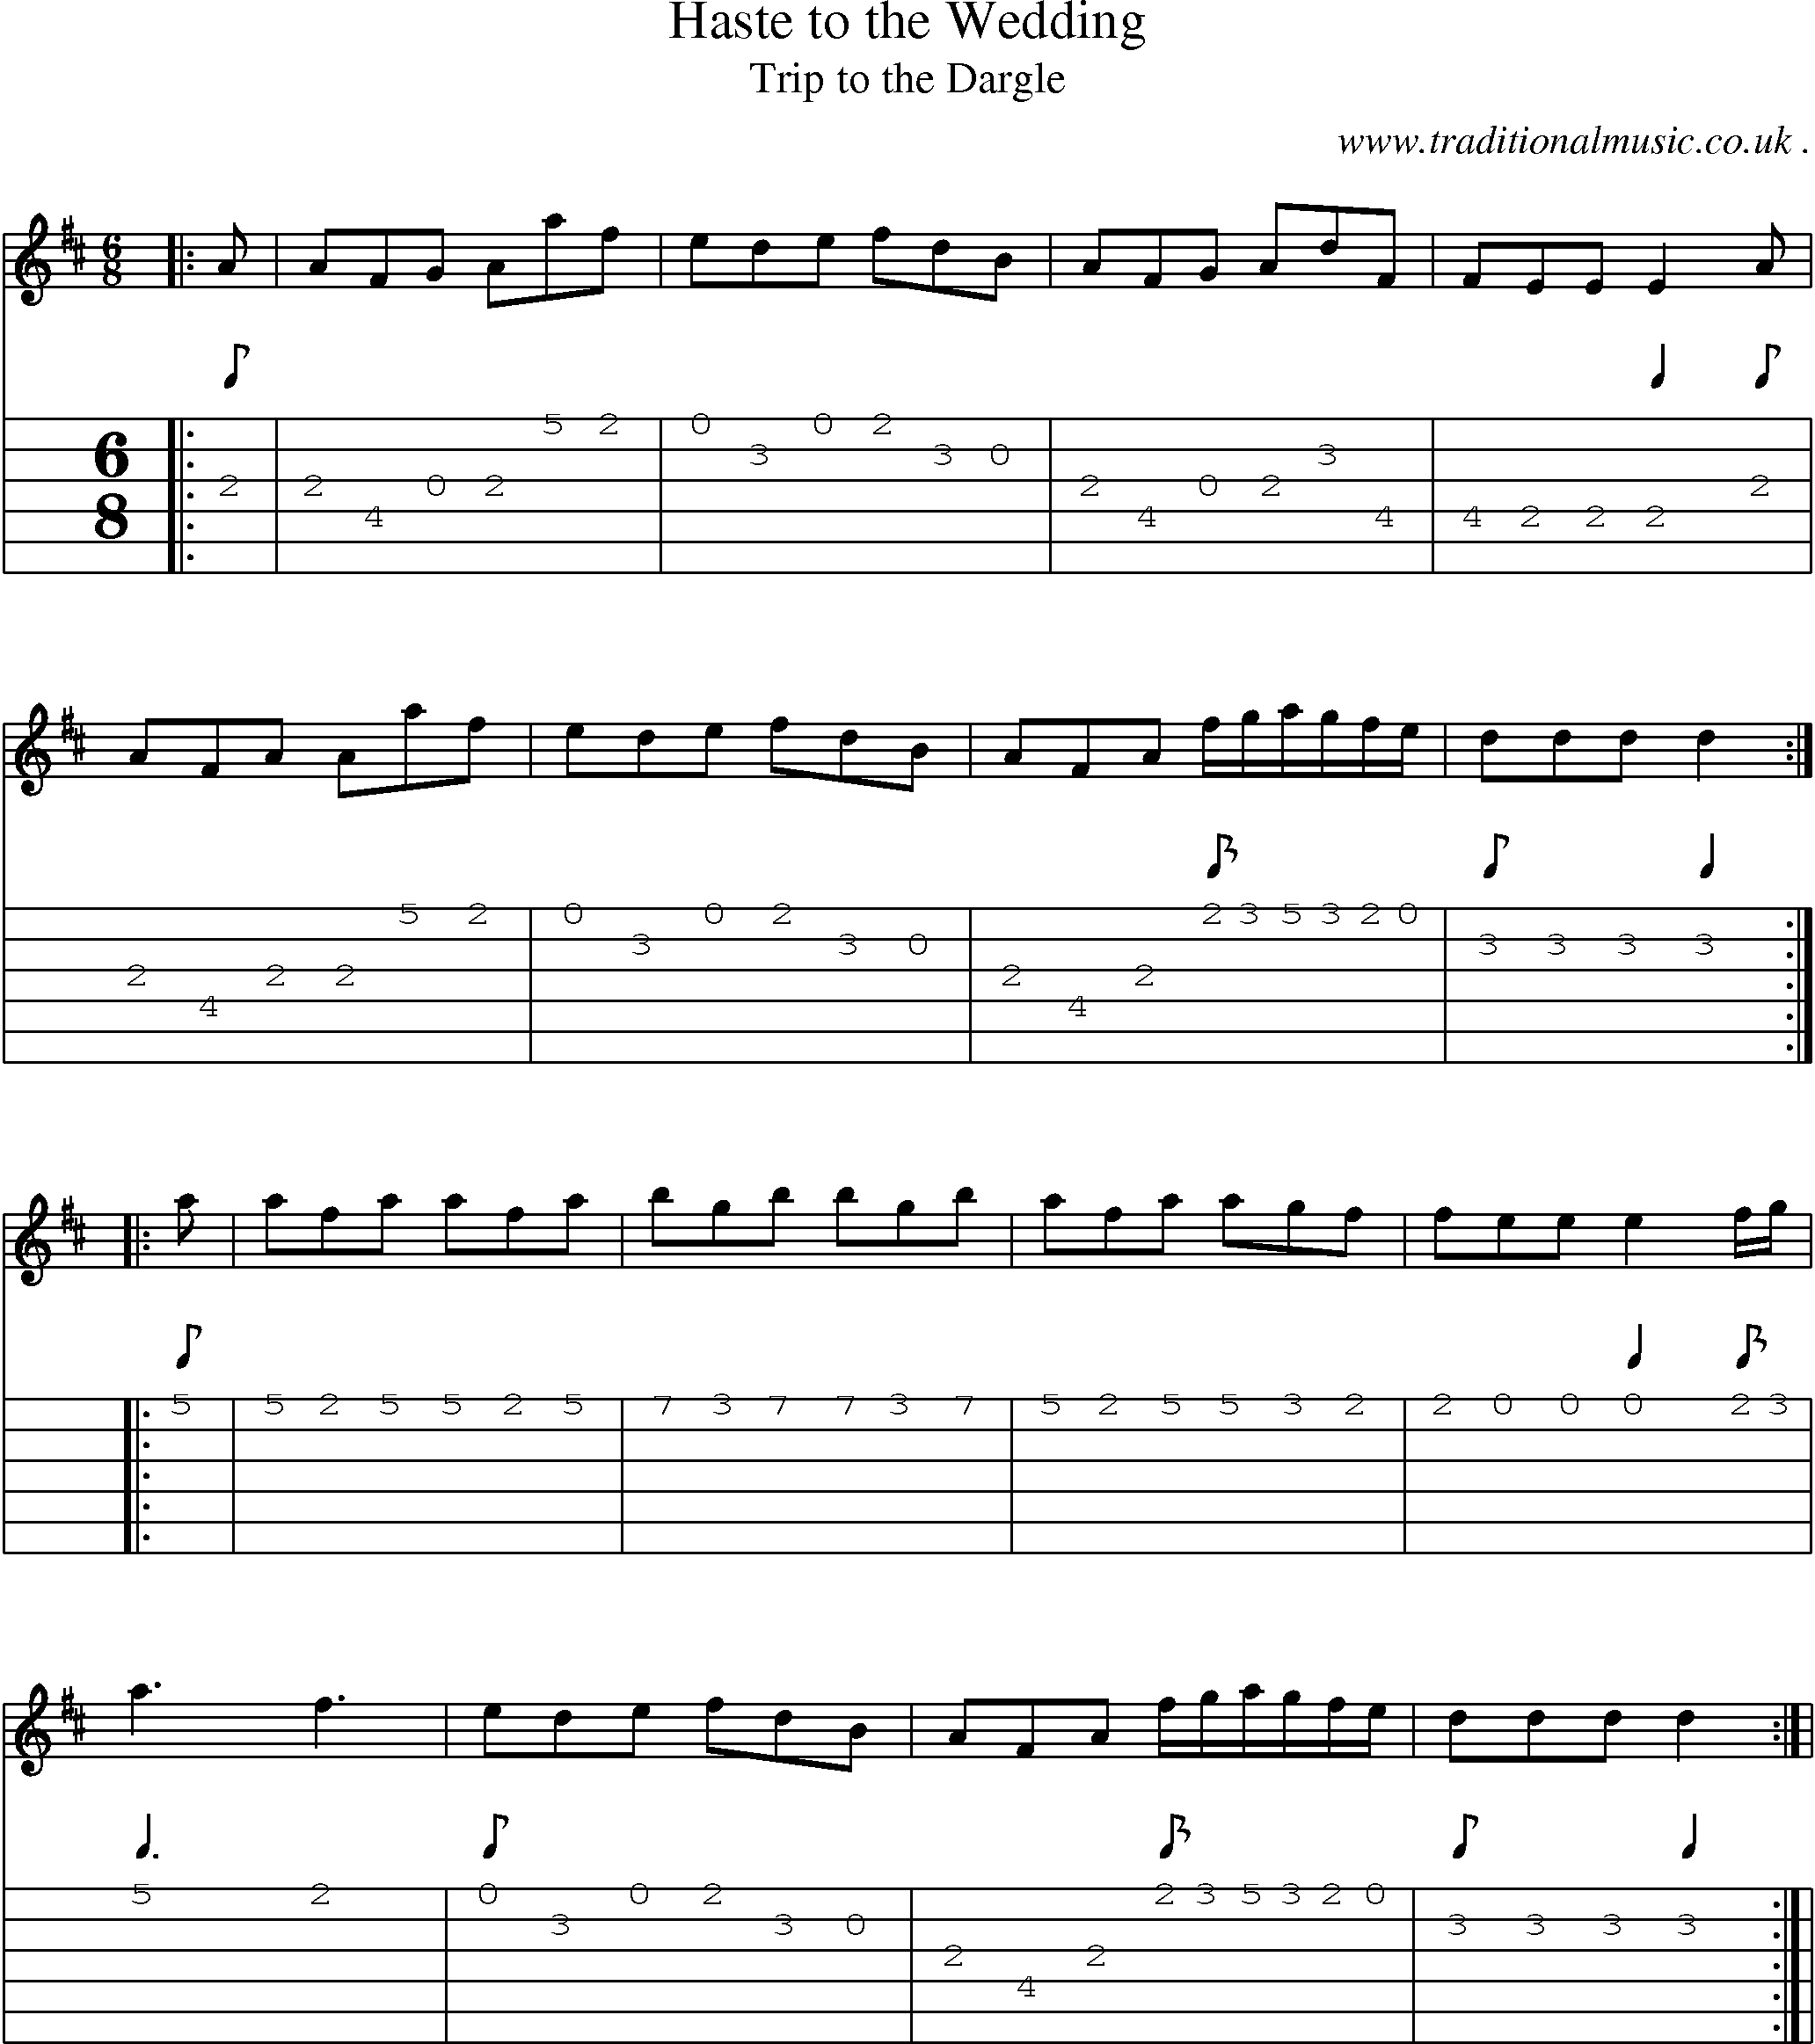 Sheet-Music and Guitar Tabs for Haste To The Wedding